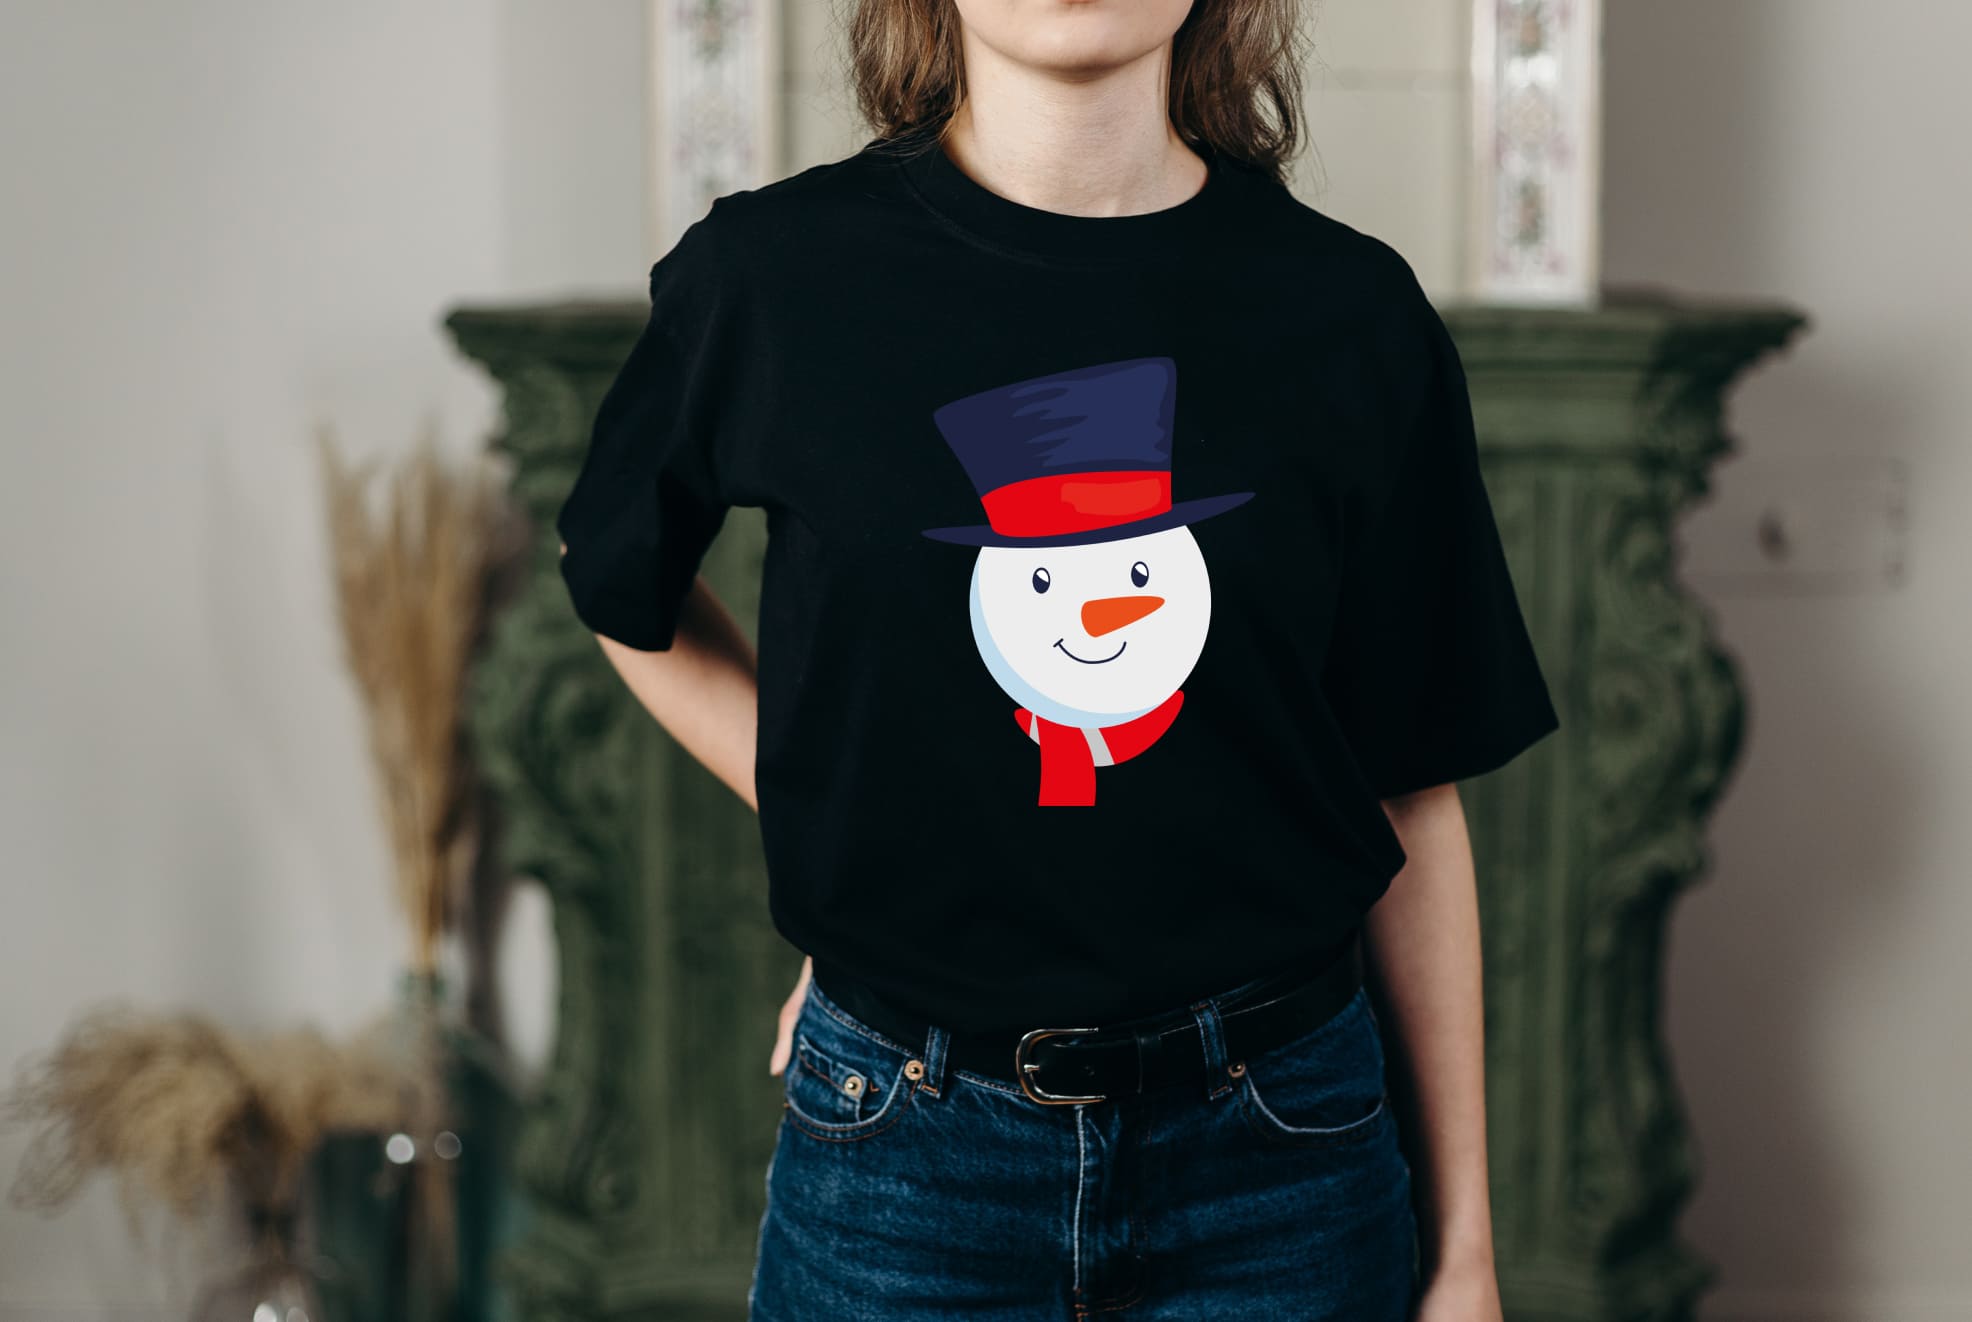 Interesting snowman in a hat on the black t-shirt.